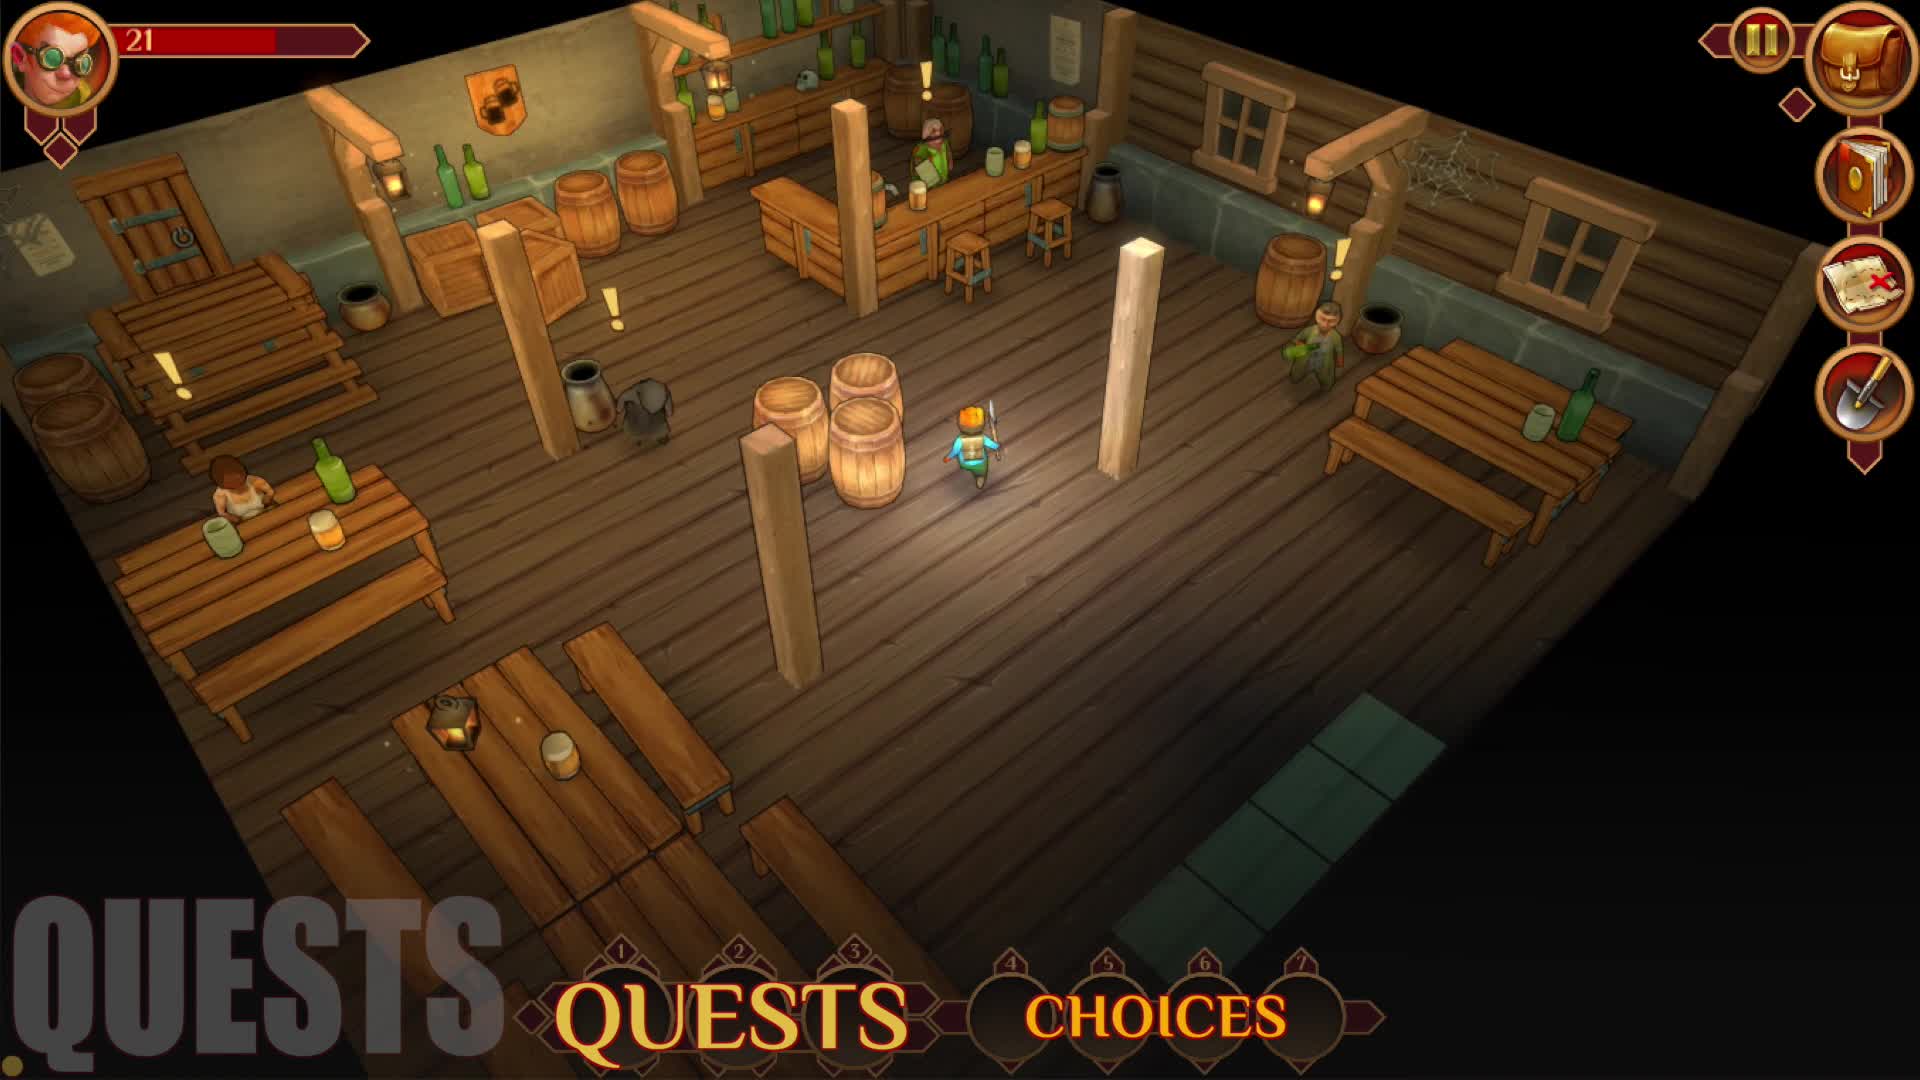 download the new for windows Quest Hunter